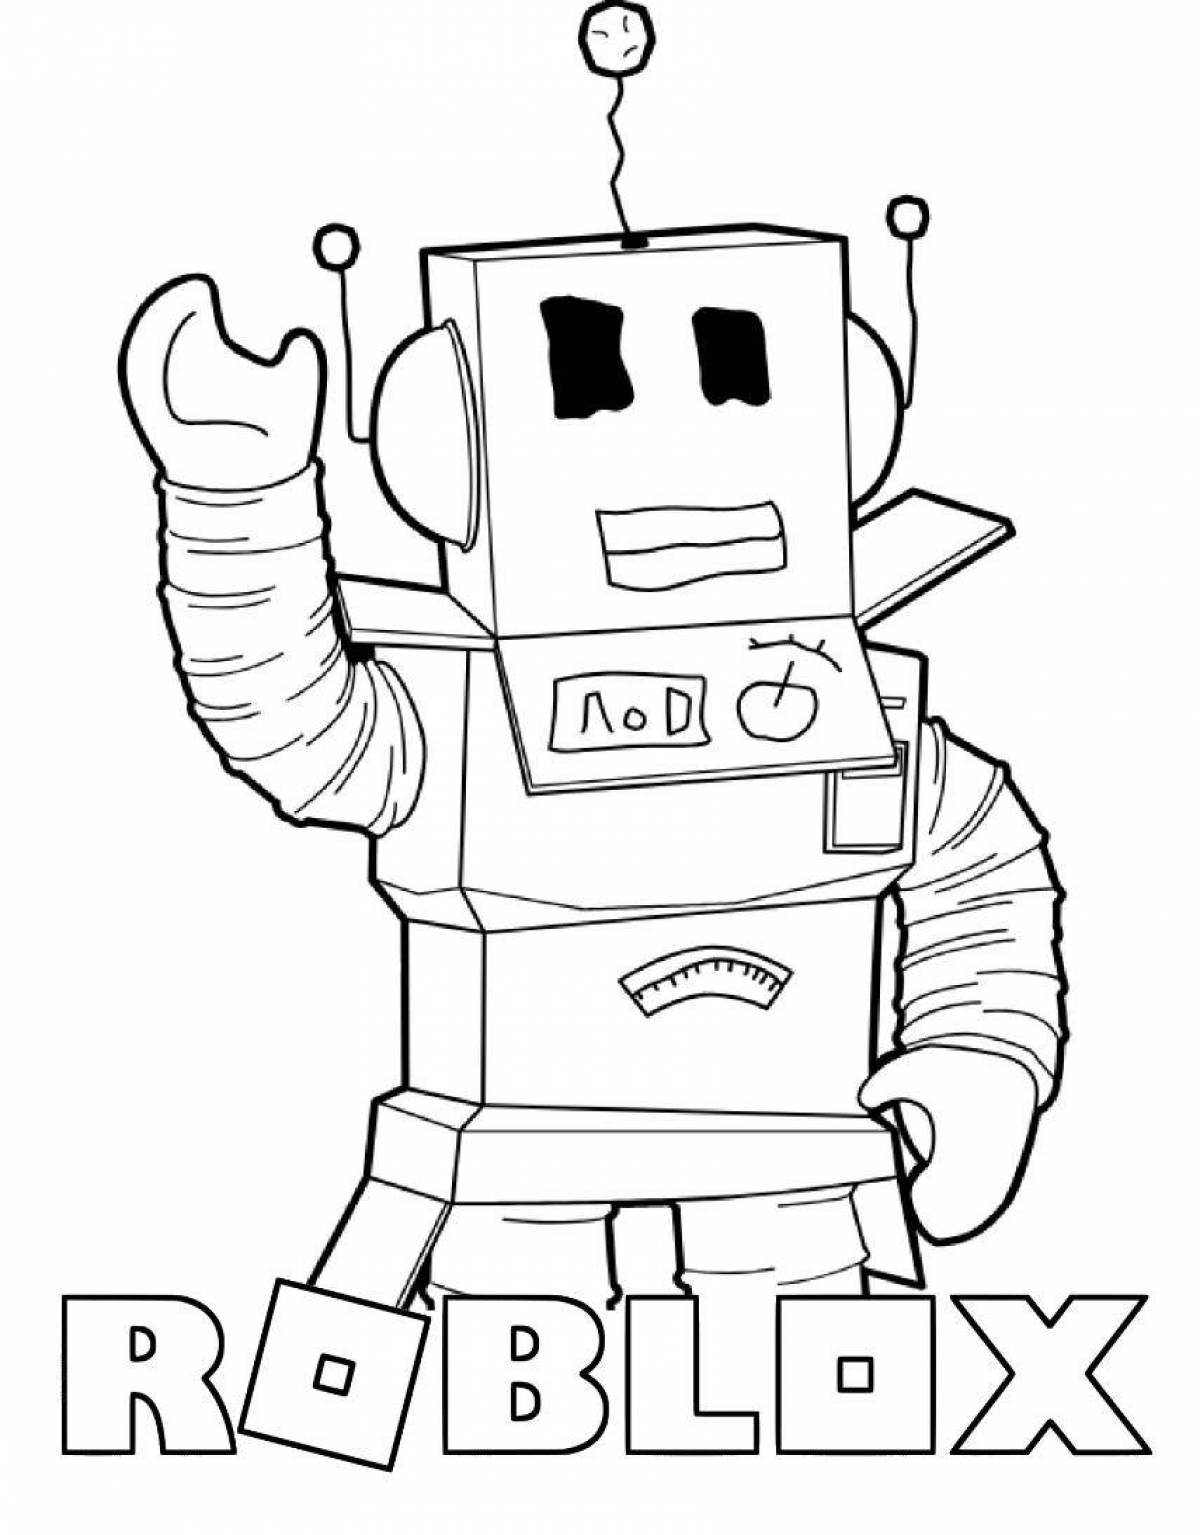 Colorful roblox men coloring page